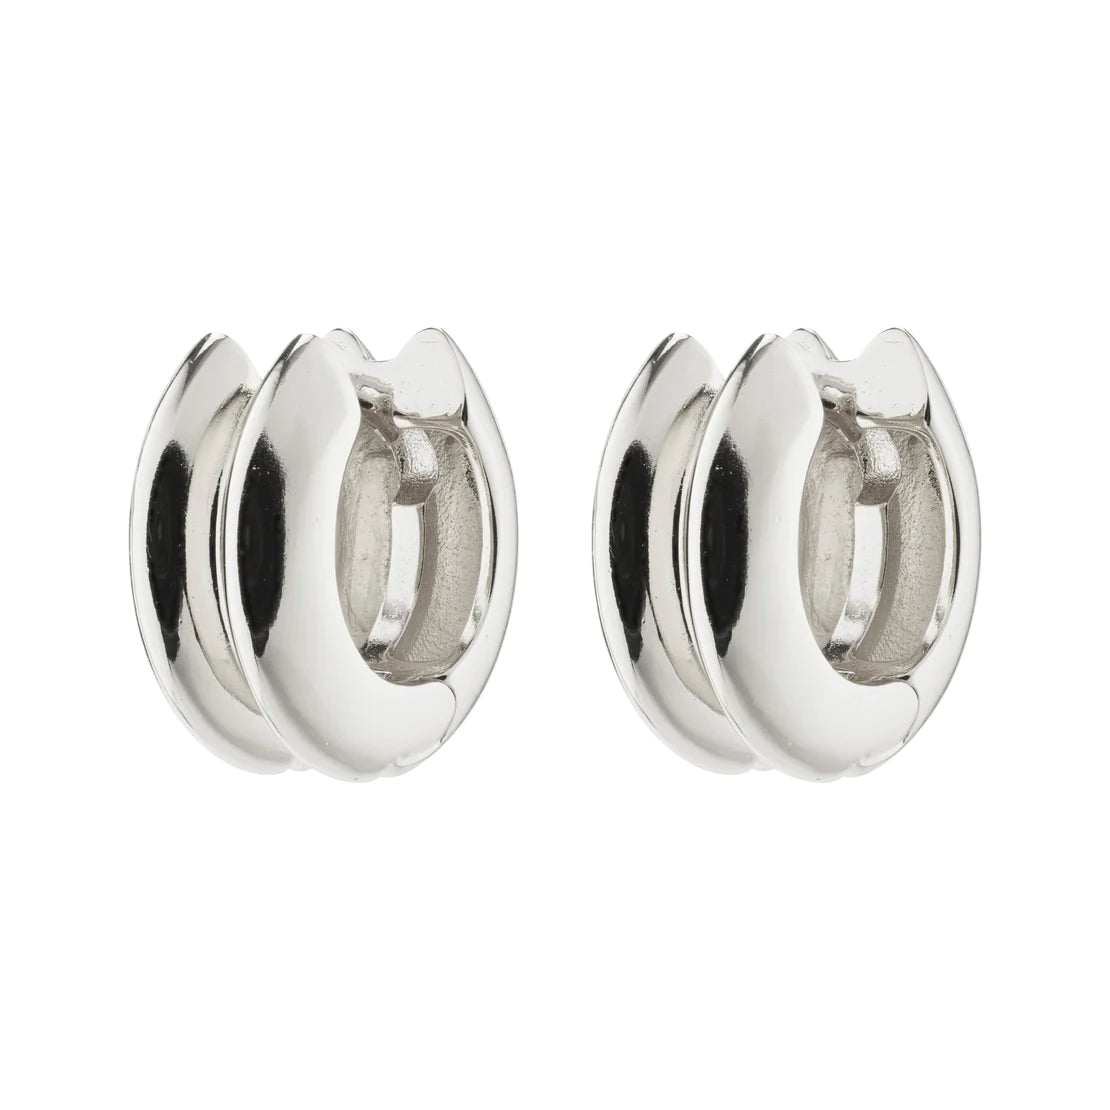 REFLECT RECYCLED HOOP EARRINGS SILVER PLATED